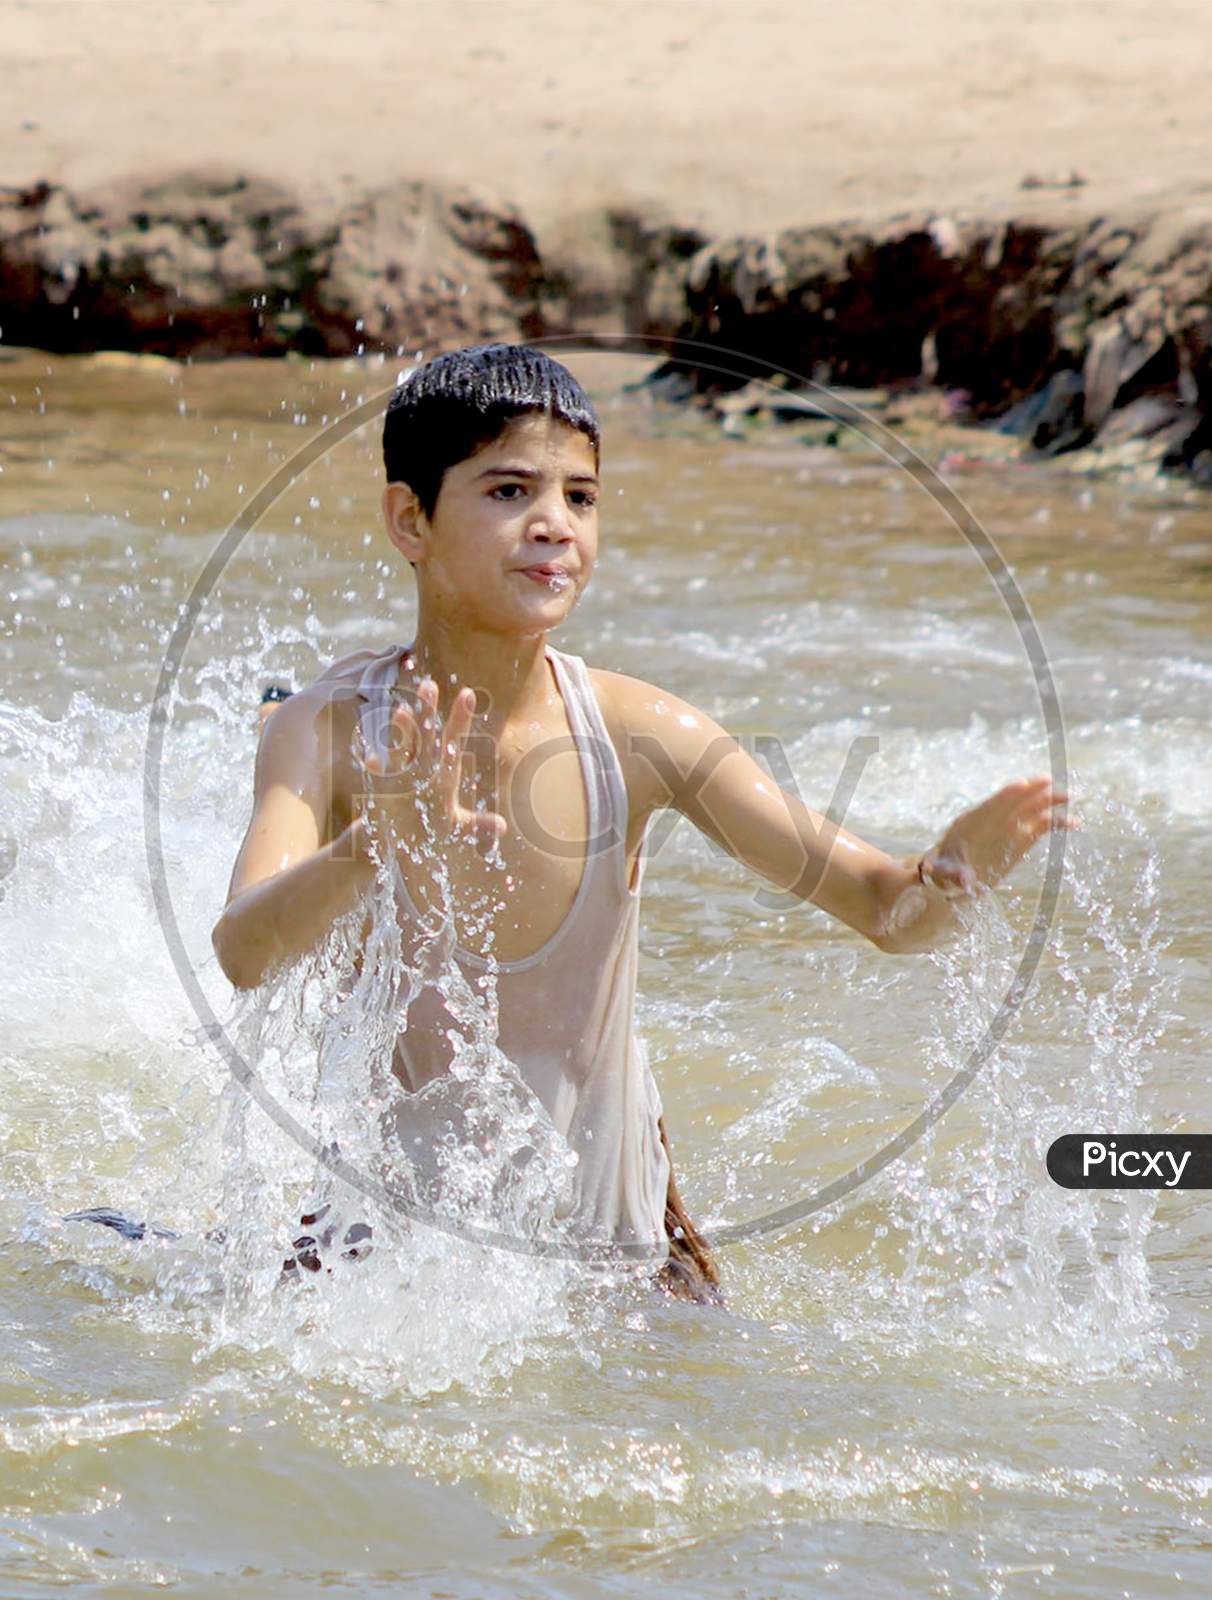 Kids Bathing In G-11 Sector Nullah Water To Protect Themselves From The Scorching Heat Of The Day.